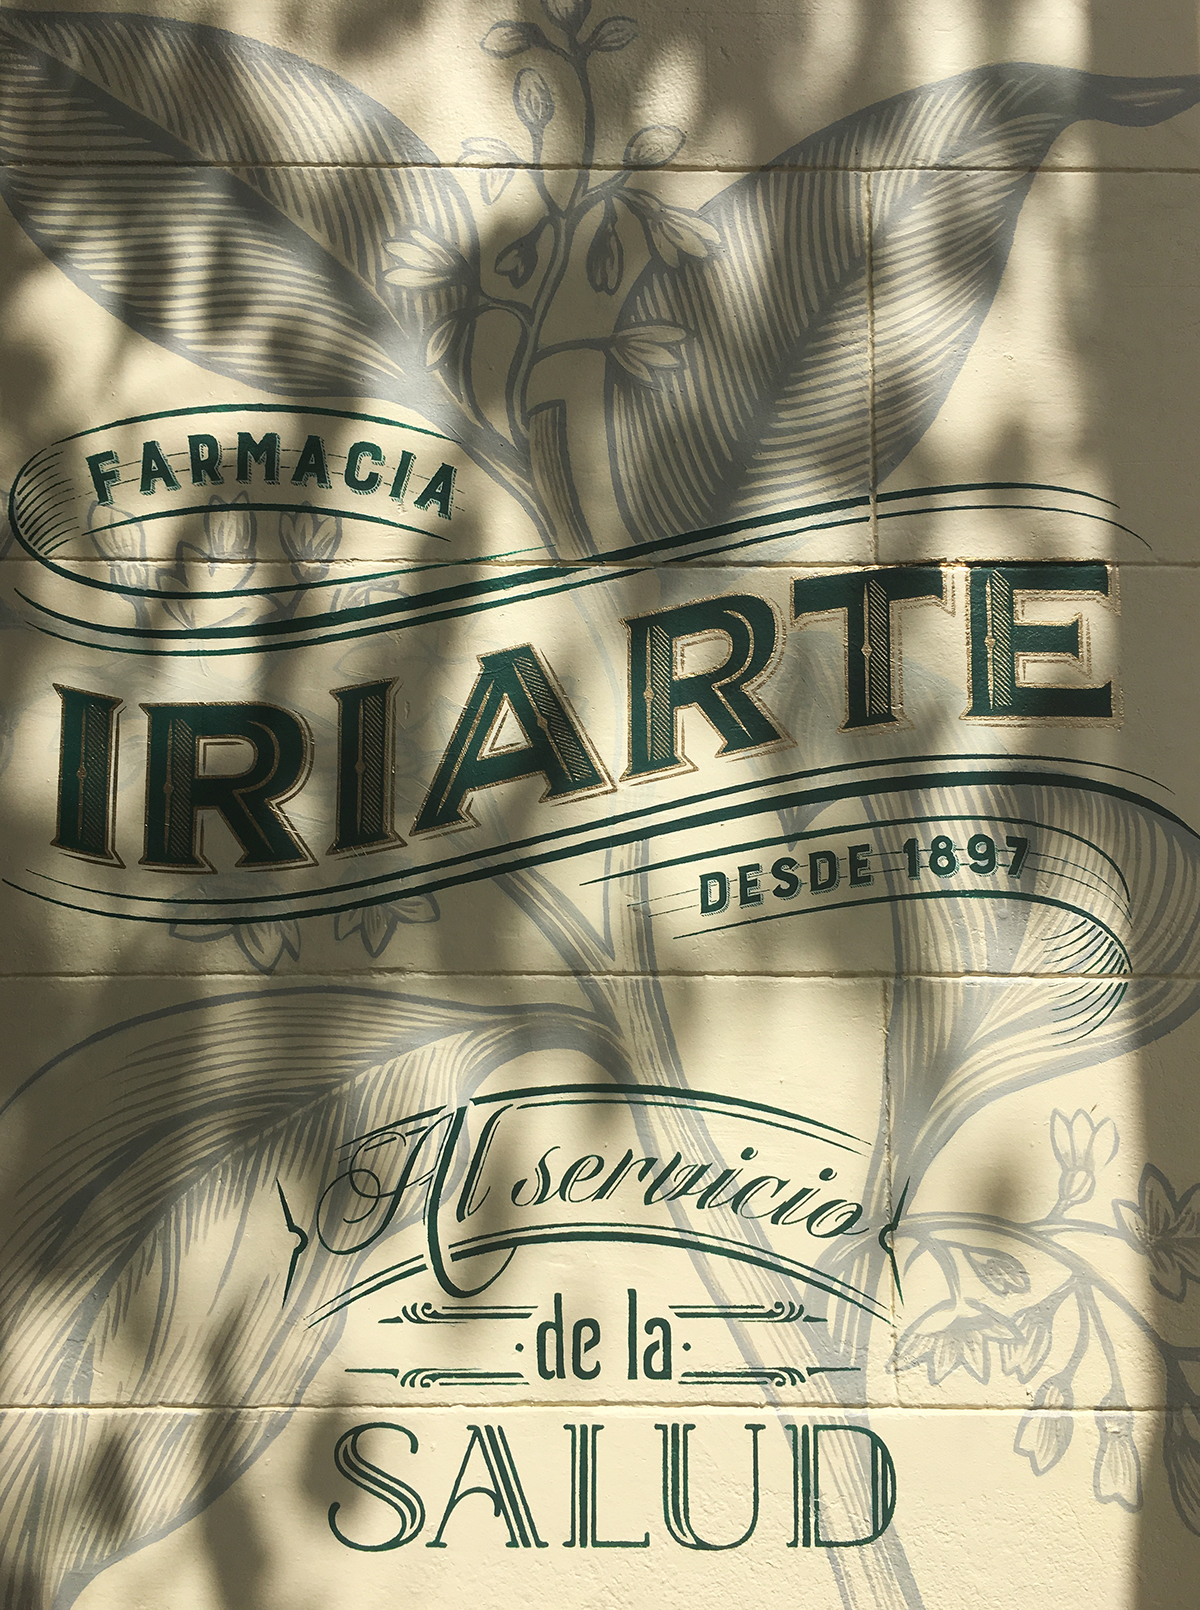 lettering botanical medicinal plants pharmacy farmacia letters design Retail wall Mural Flowers plants buenos aires